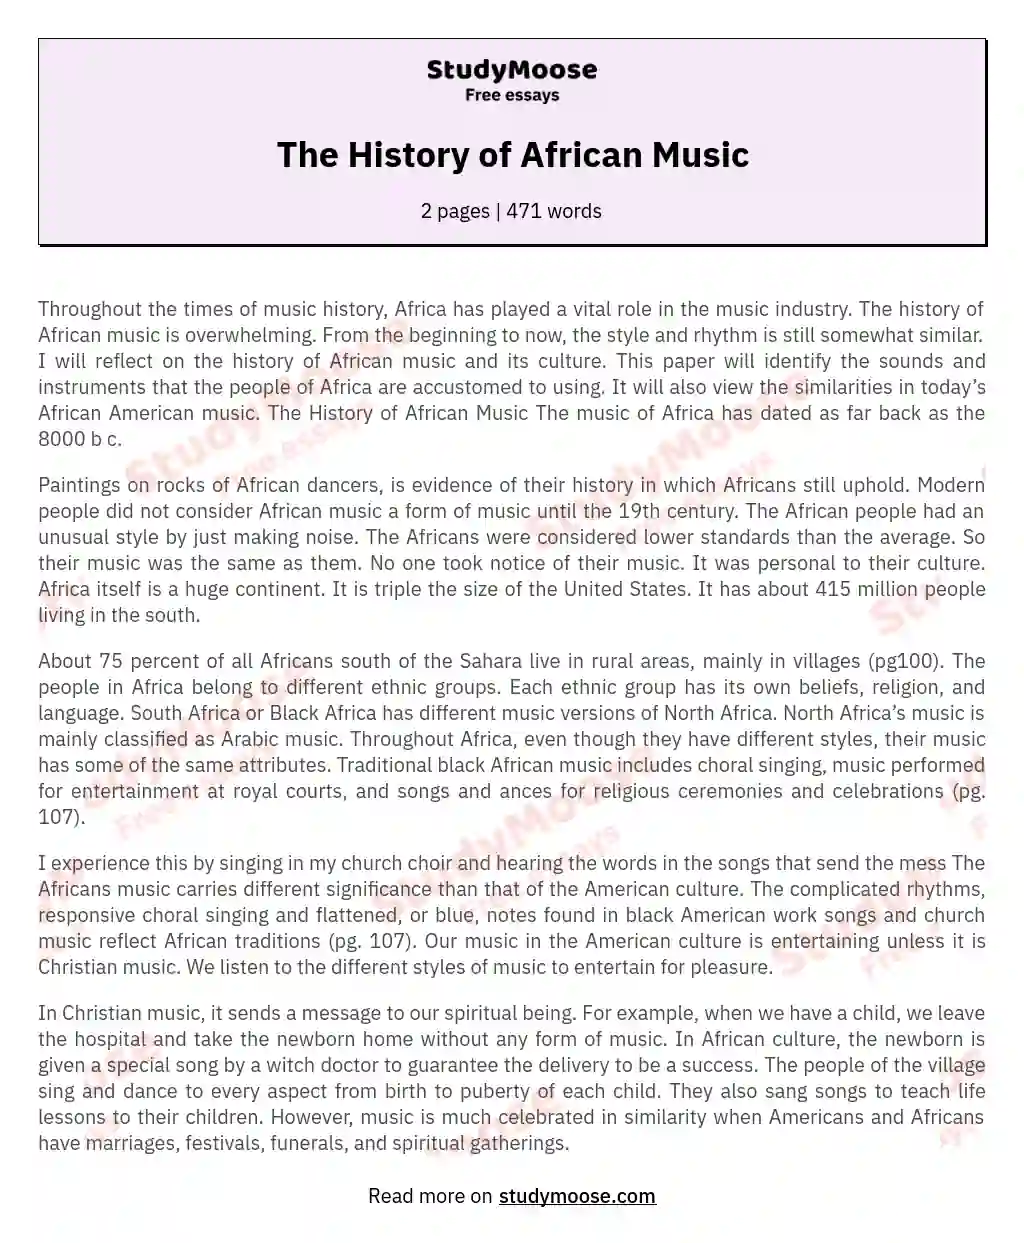 The History of African Music